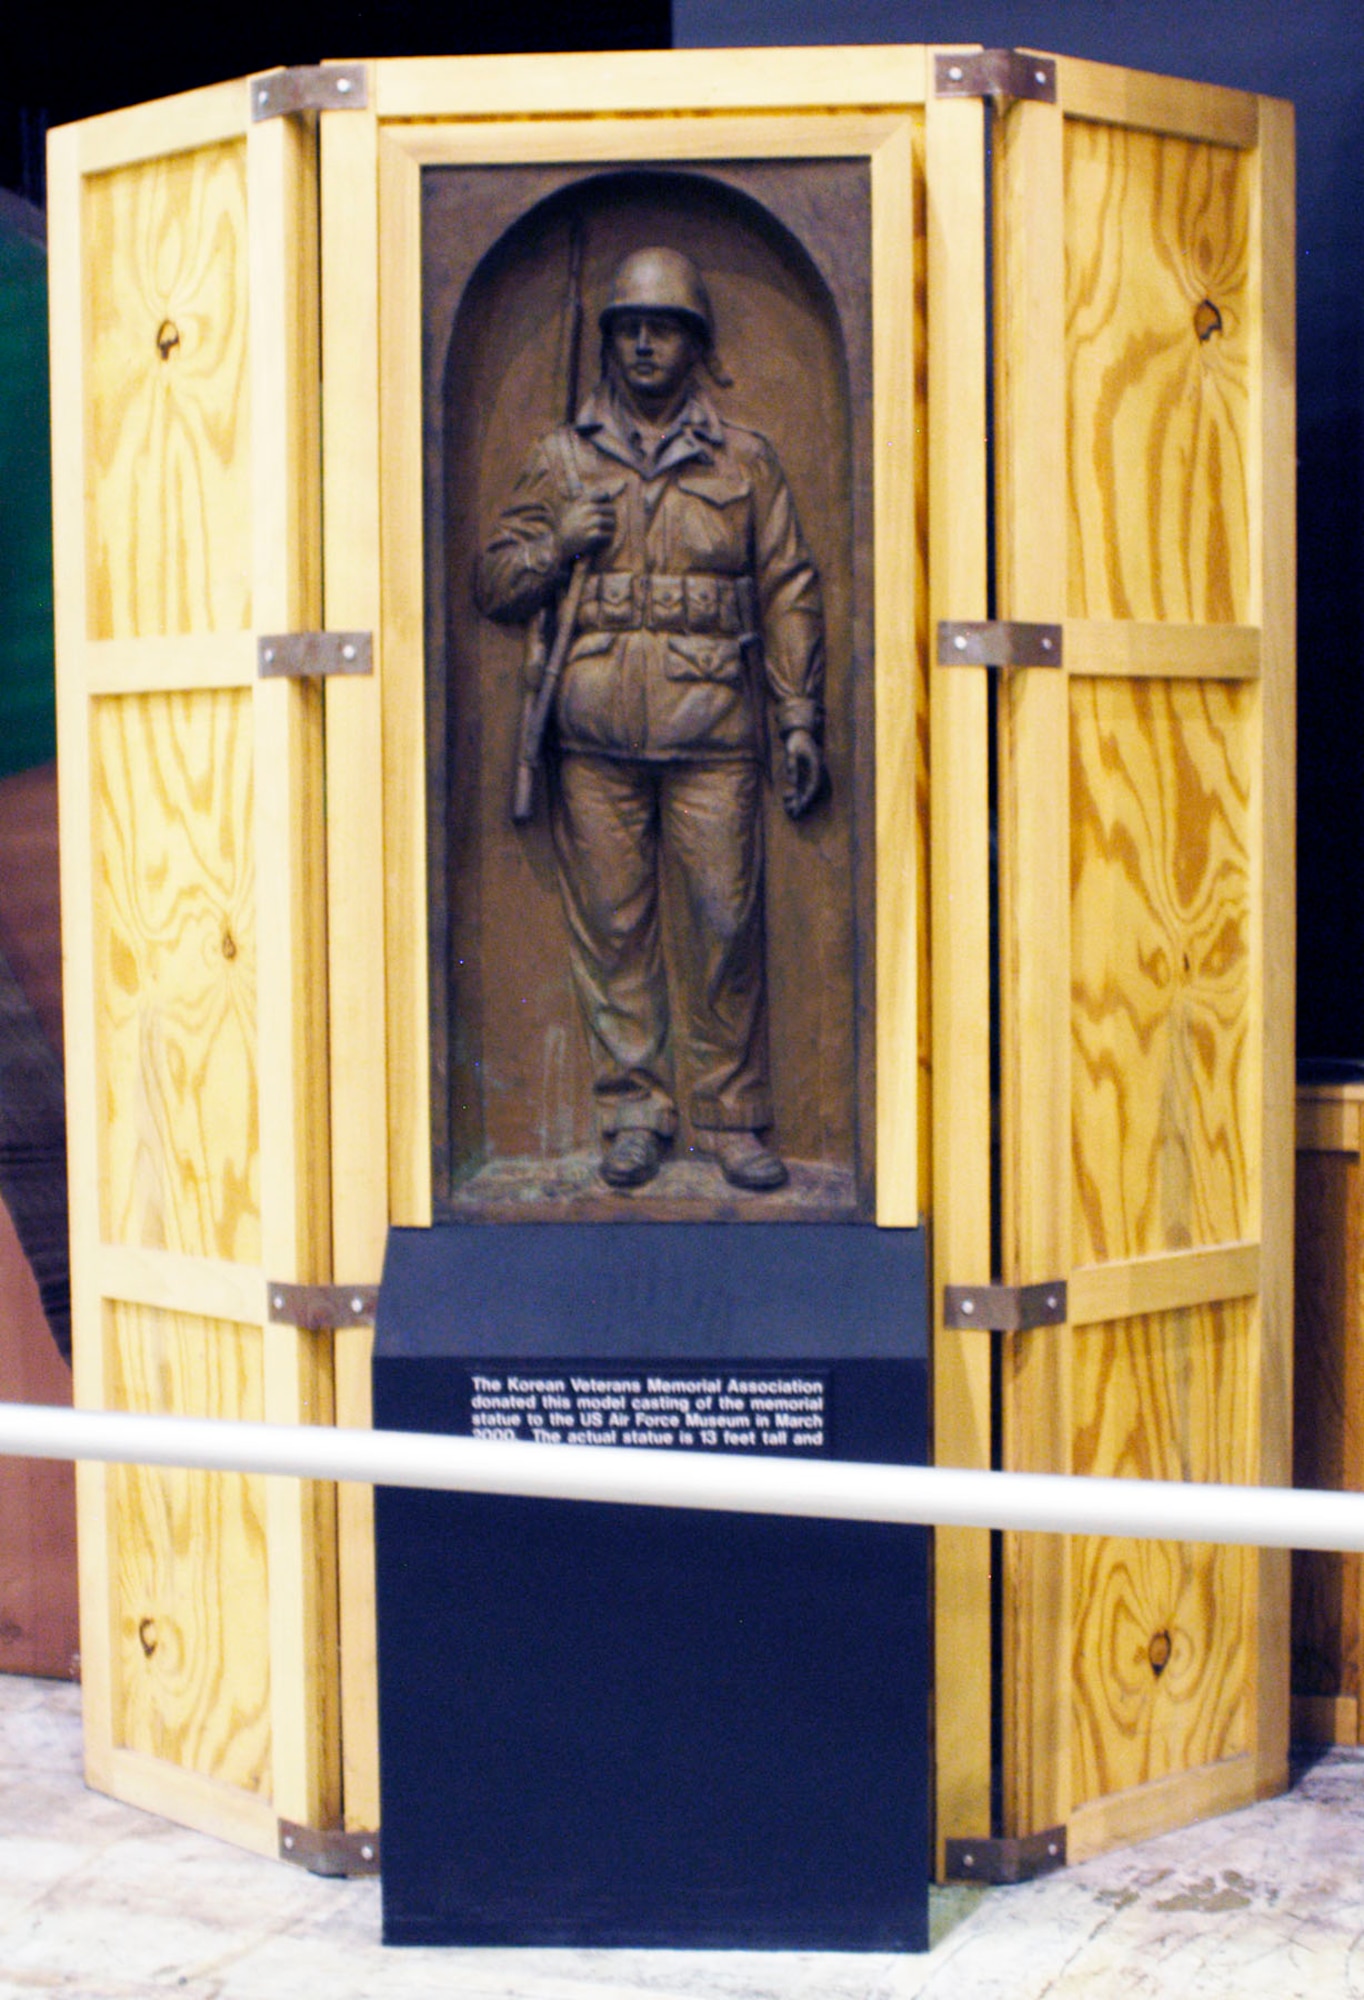 DAYTON, Ohio -- The Korean Veterans Memorial Association donated this model casting to the National Museum of the U.S. Air Force in March 2000. A 13-foot tall granite statue based on this model and representing all the services stands in nearby downtown Dayton. (U.S. Air Force photo)